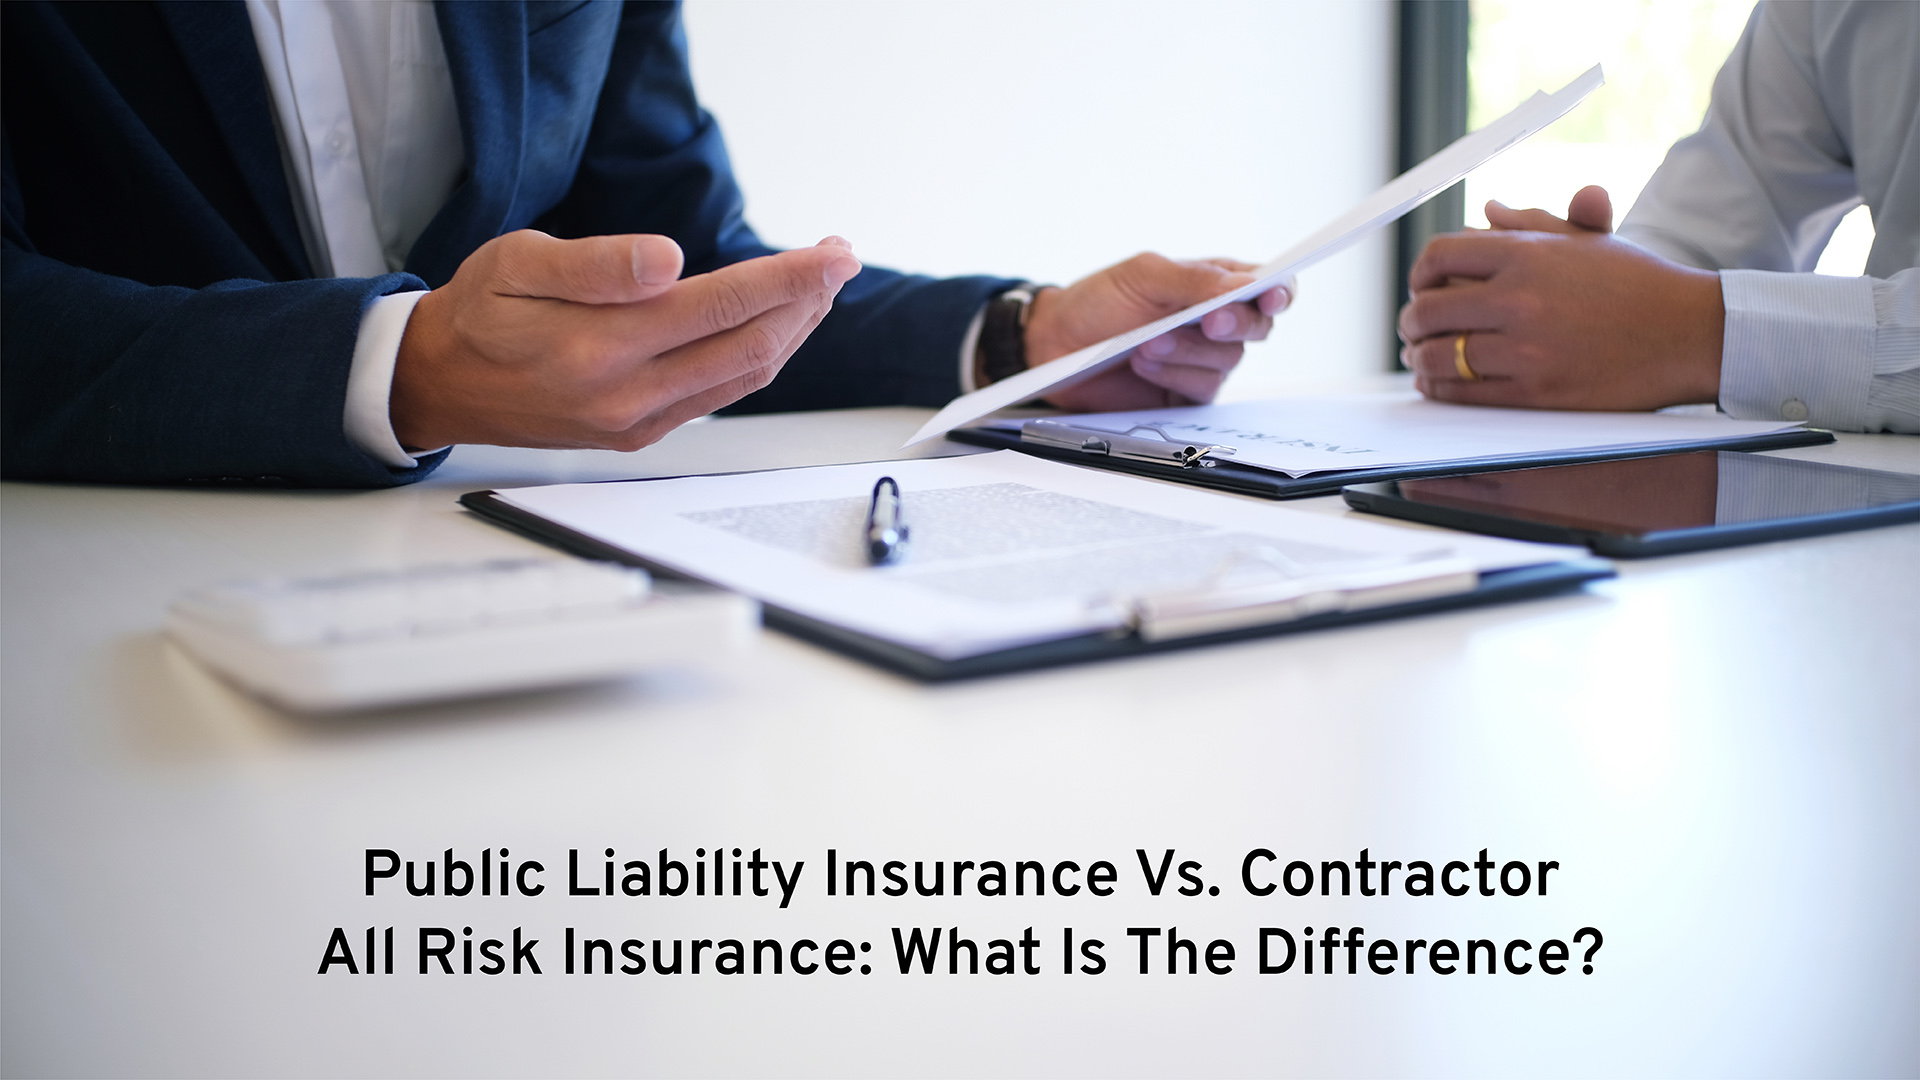 Public Liability Insurance Vs. Contractor All Risk Insurance: What Is The Difference?